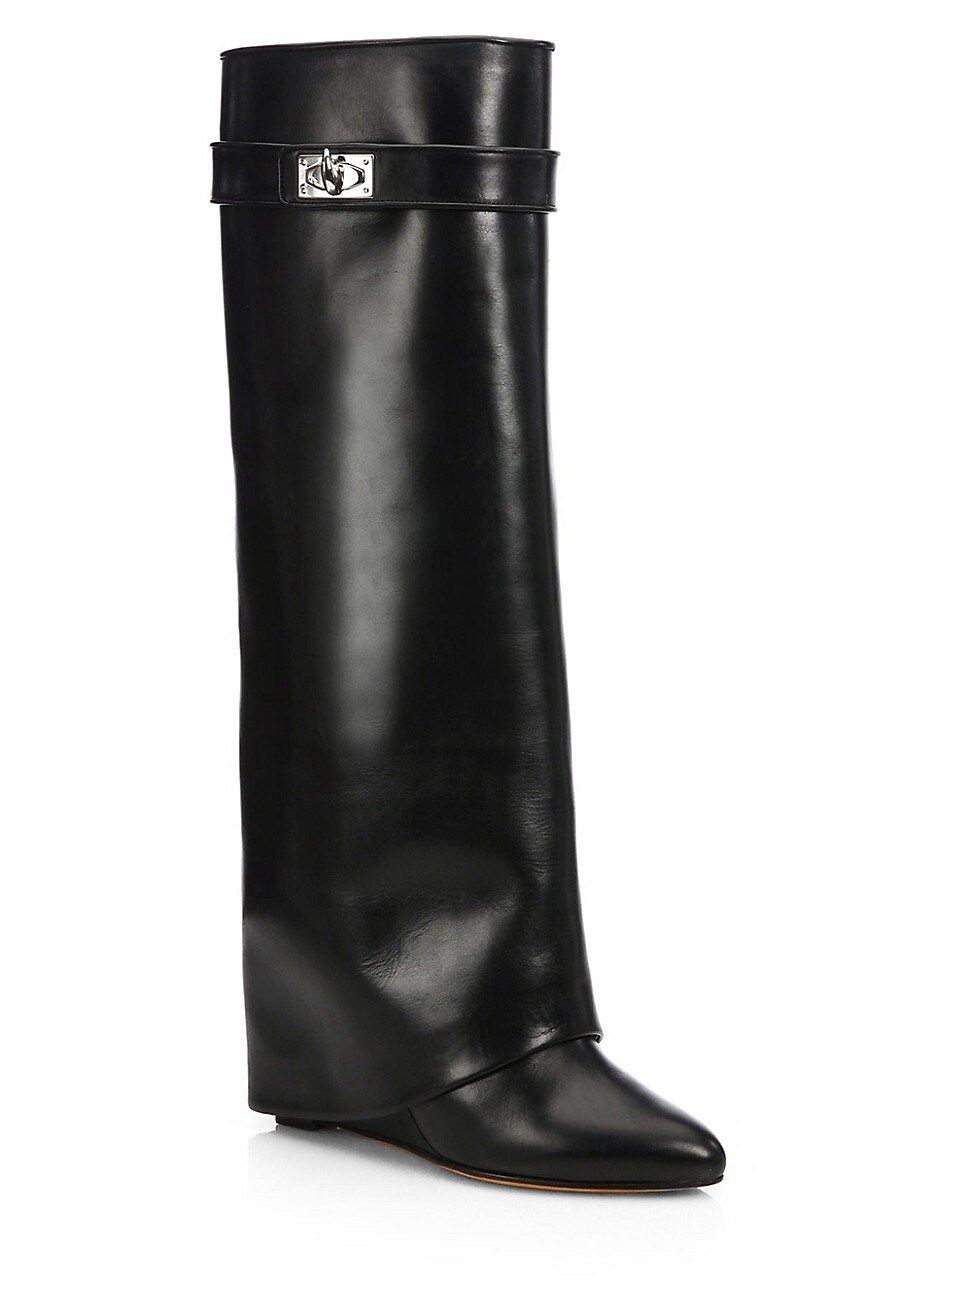 Givenchy Women's Shark Lock Knee-High Leather Wedge Boots - Black - Size 6.5 | Saks Fifth Avenue